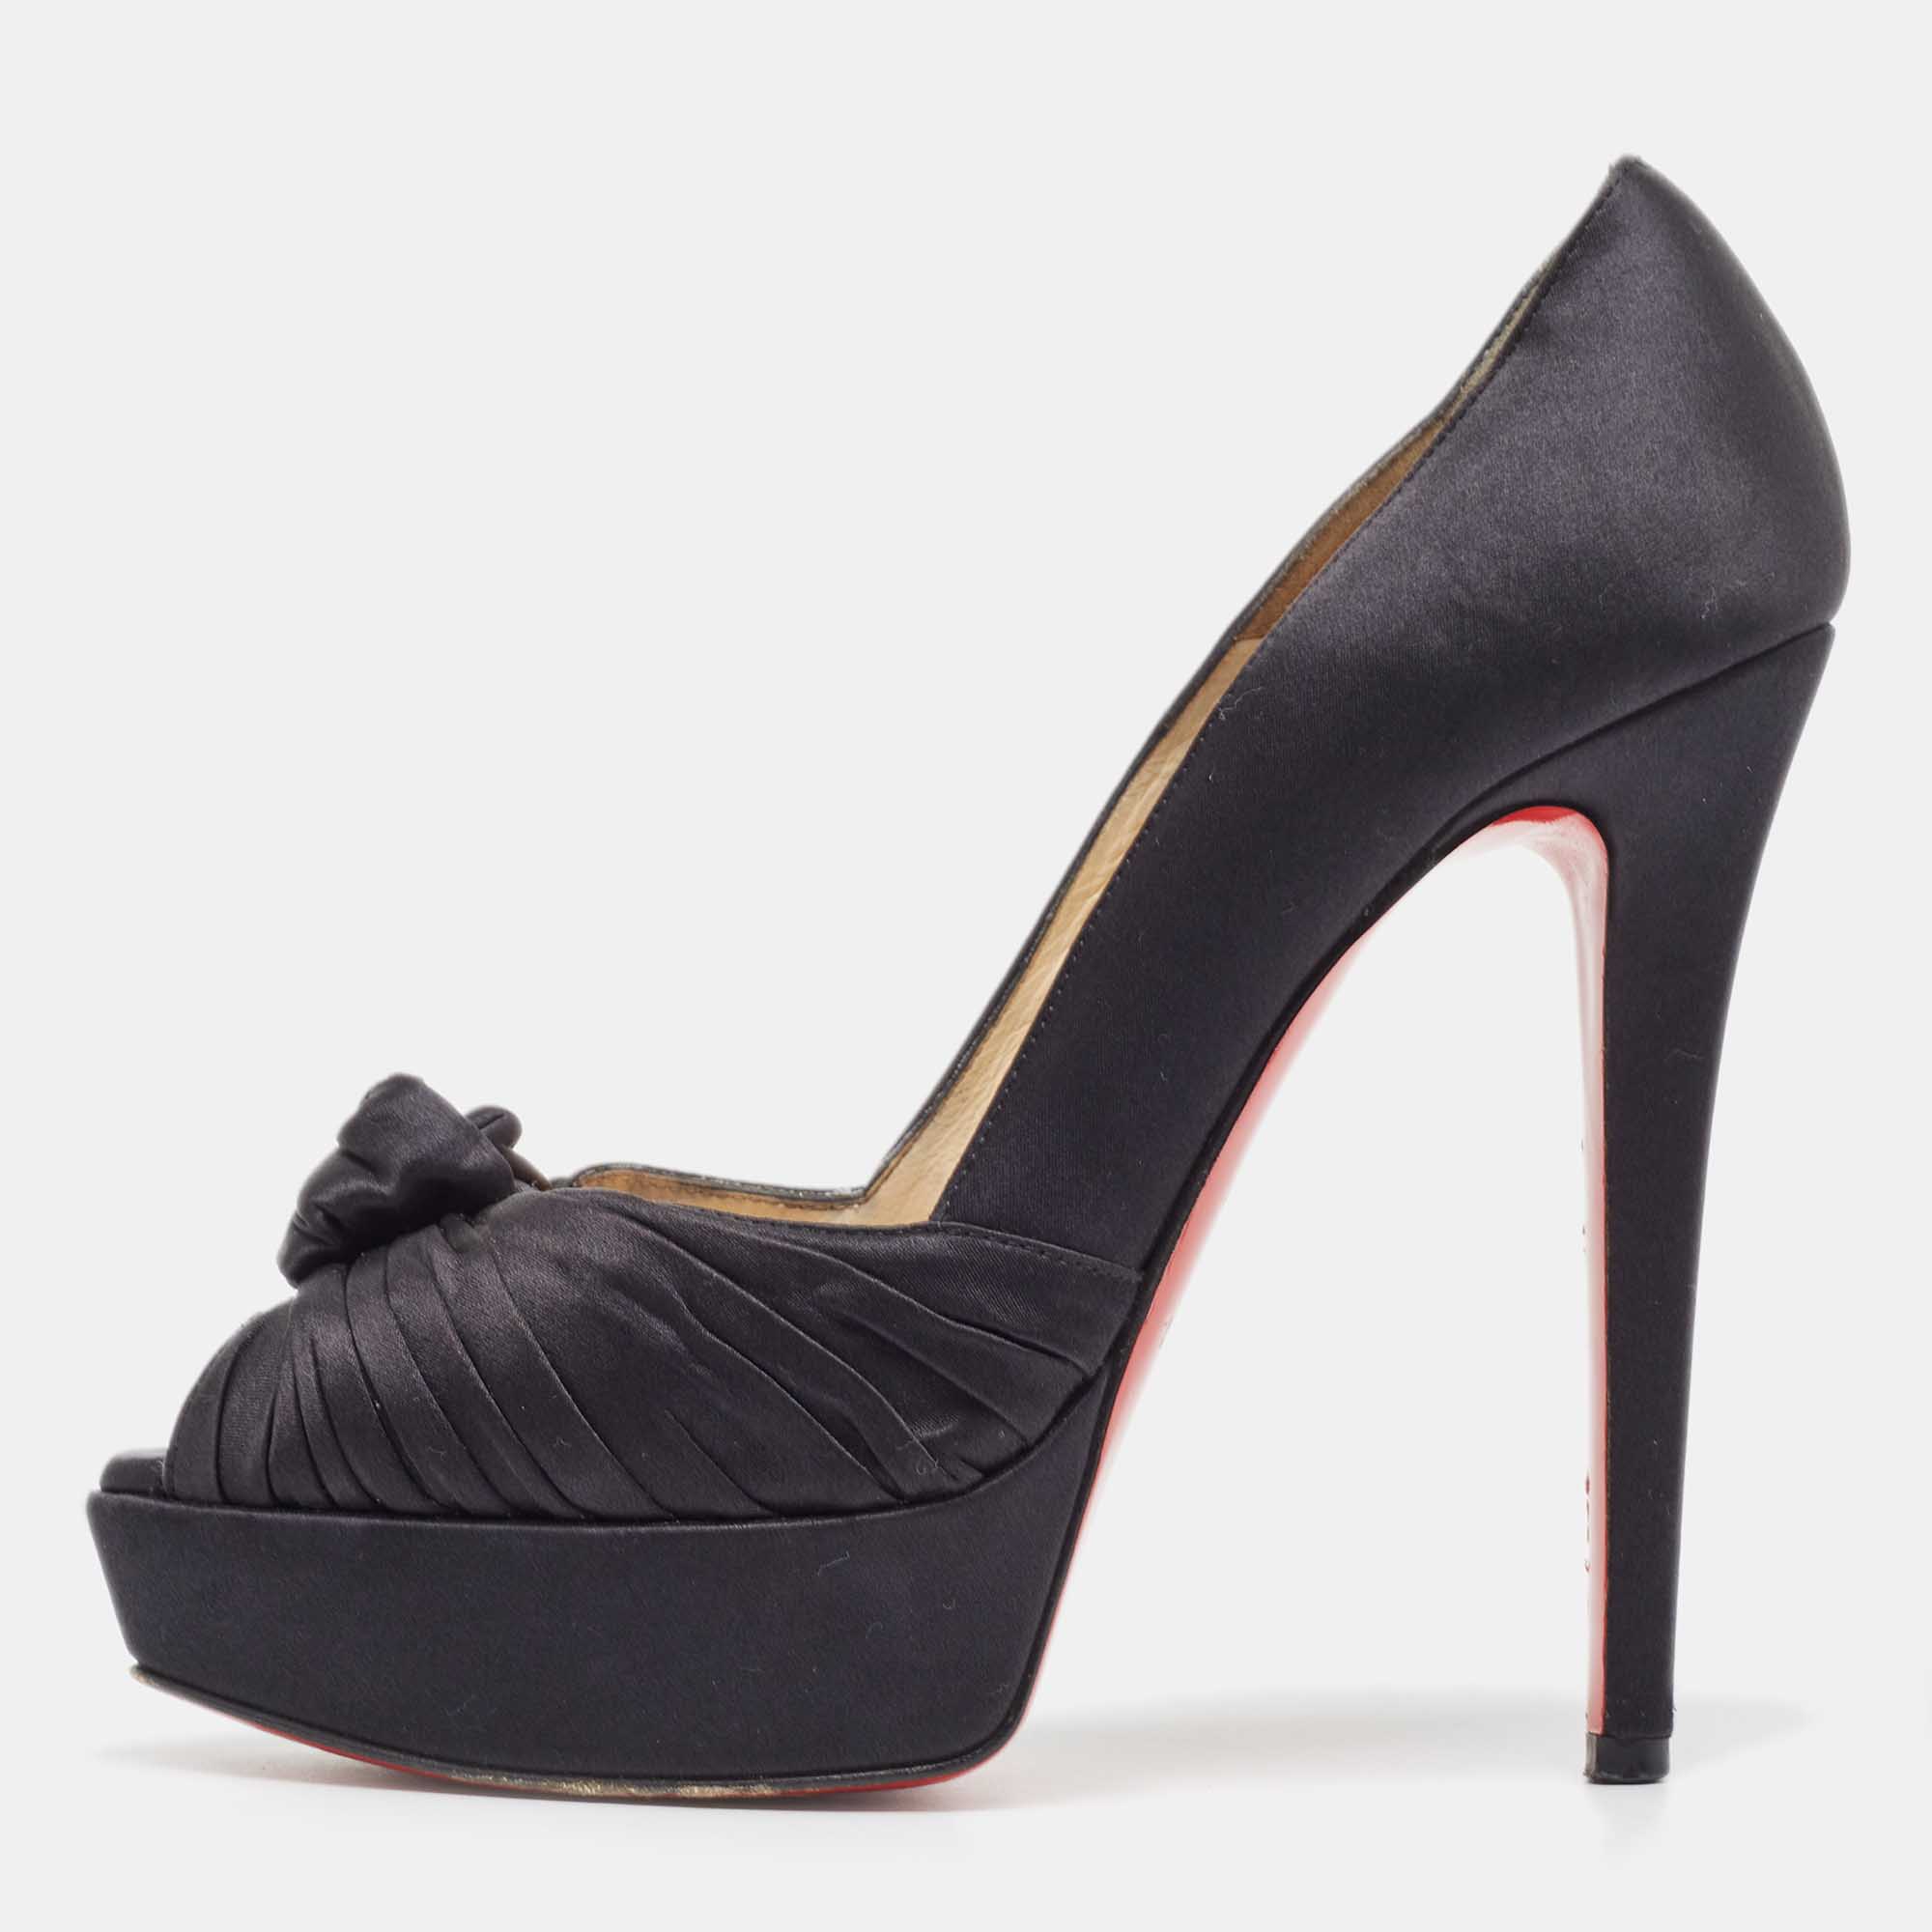 Pre-owned Christian Louboutin Black Knotted Satin Peep Toe Platform Pumps Size 37